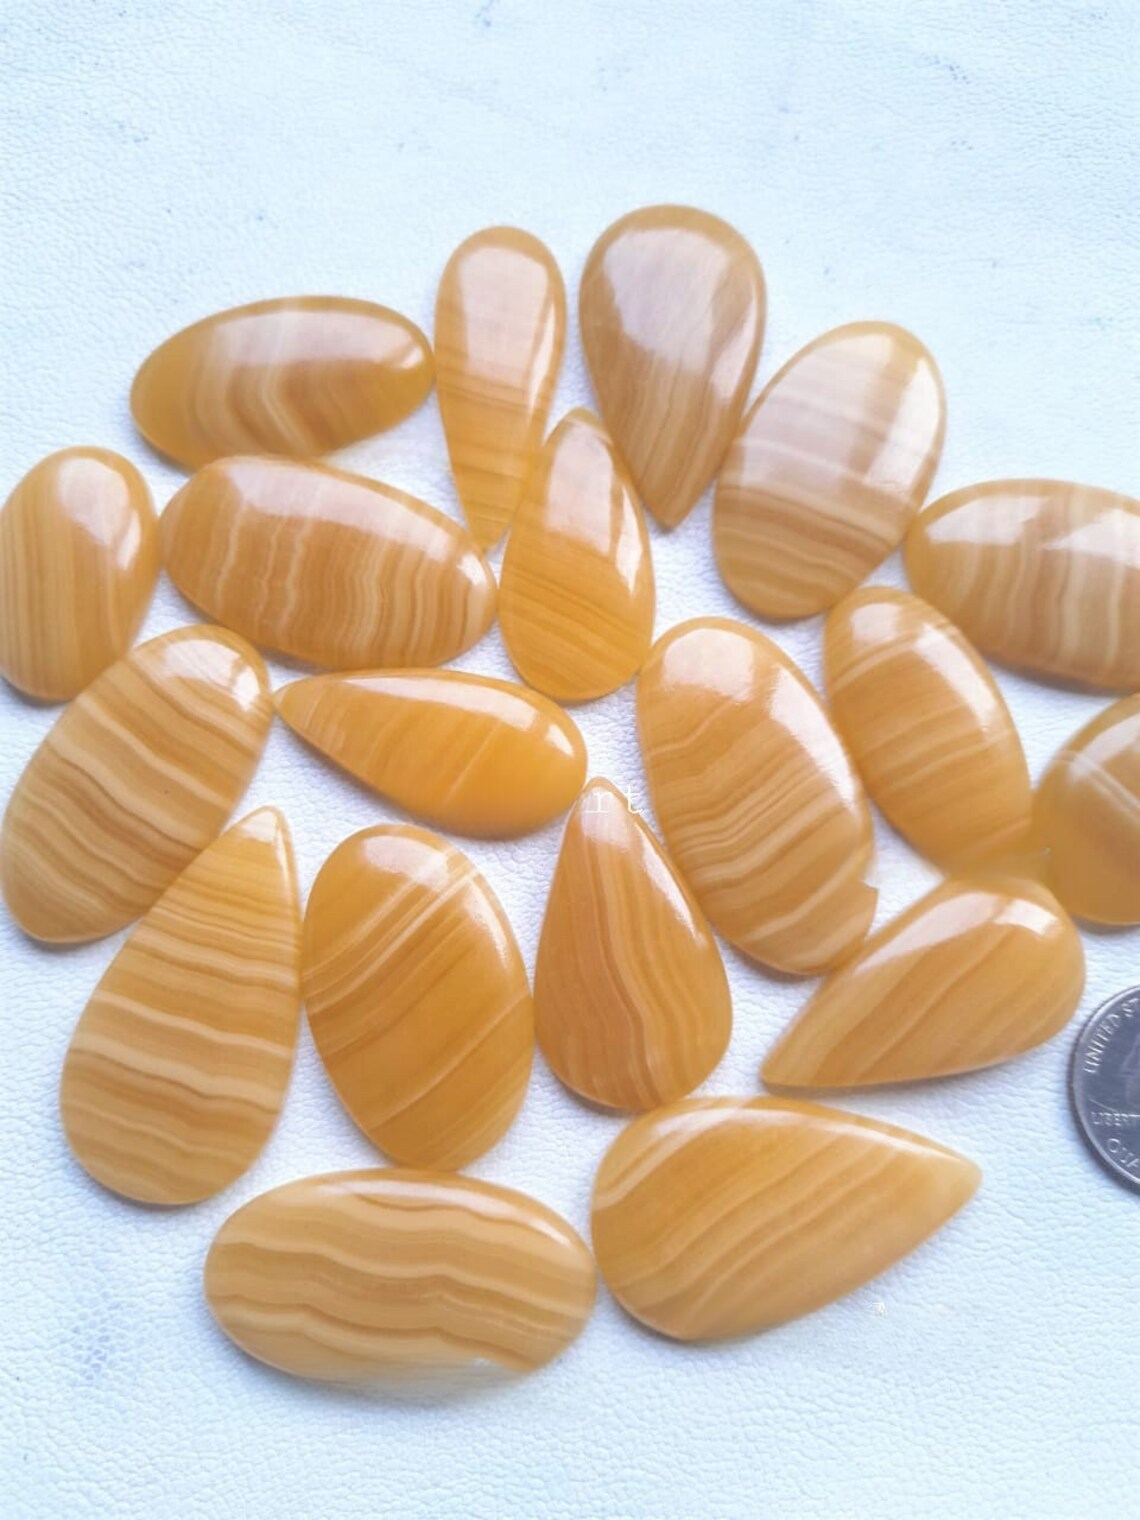 Wholesale Lot of Yellow Aragonite Cabochon By Weight With Different Shapes And Sizes Used For Jewelry Making (Natural)